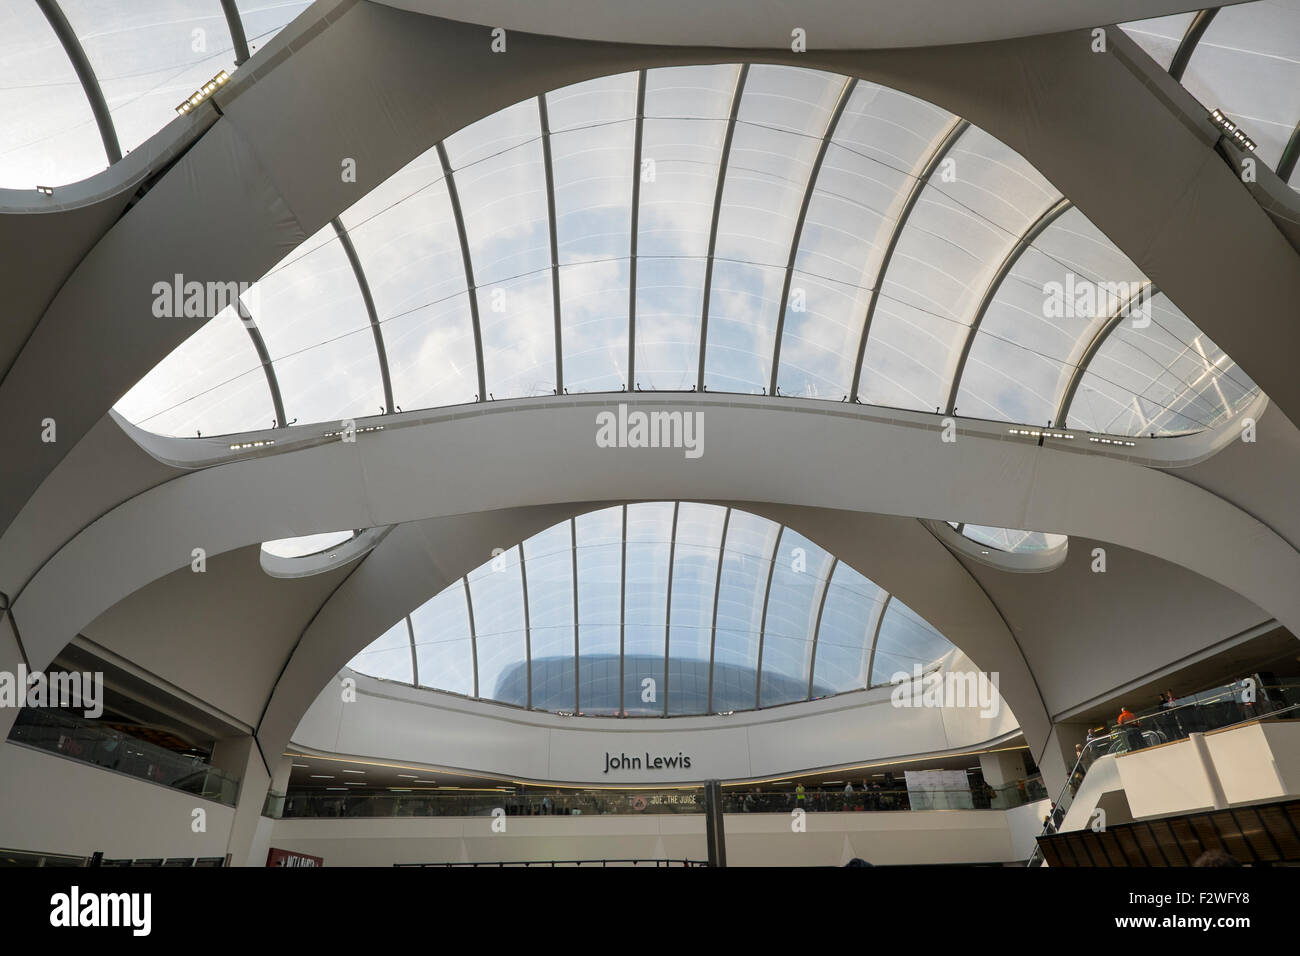 Inside the atrium at Birmingham's Grand Central shopping centre looking to John Lewis store, England, UK Stock Photo